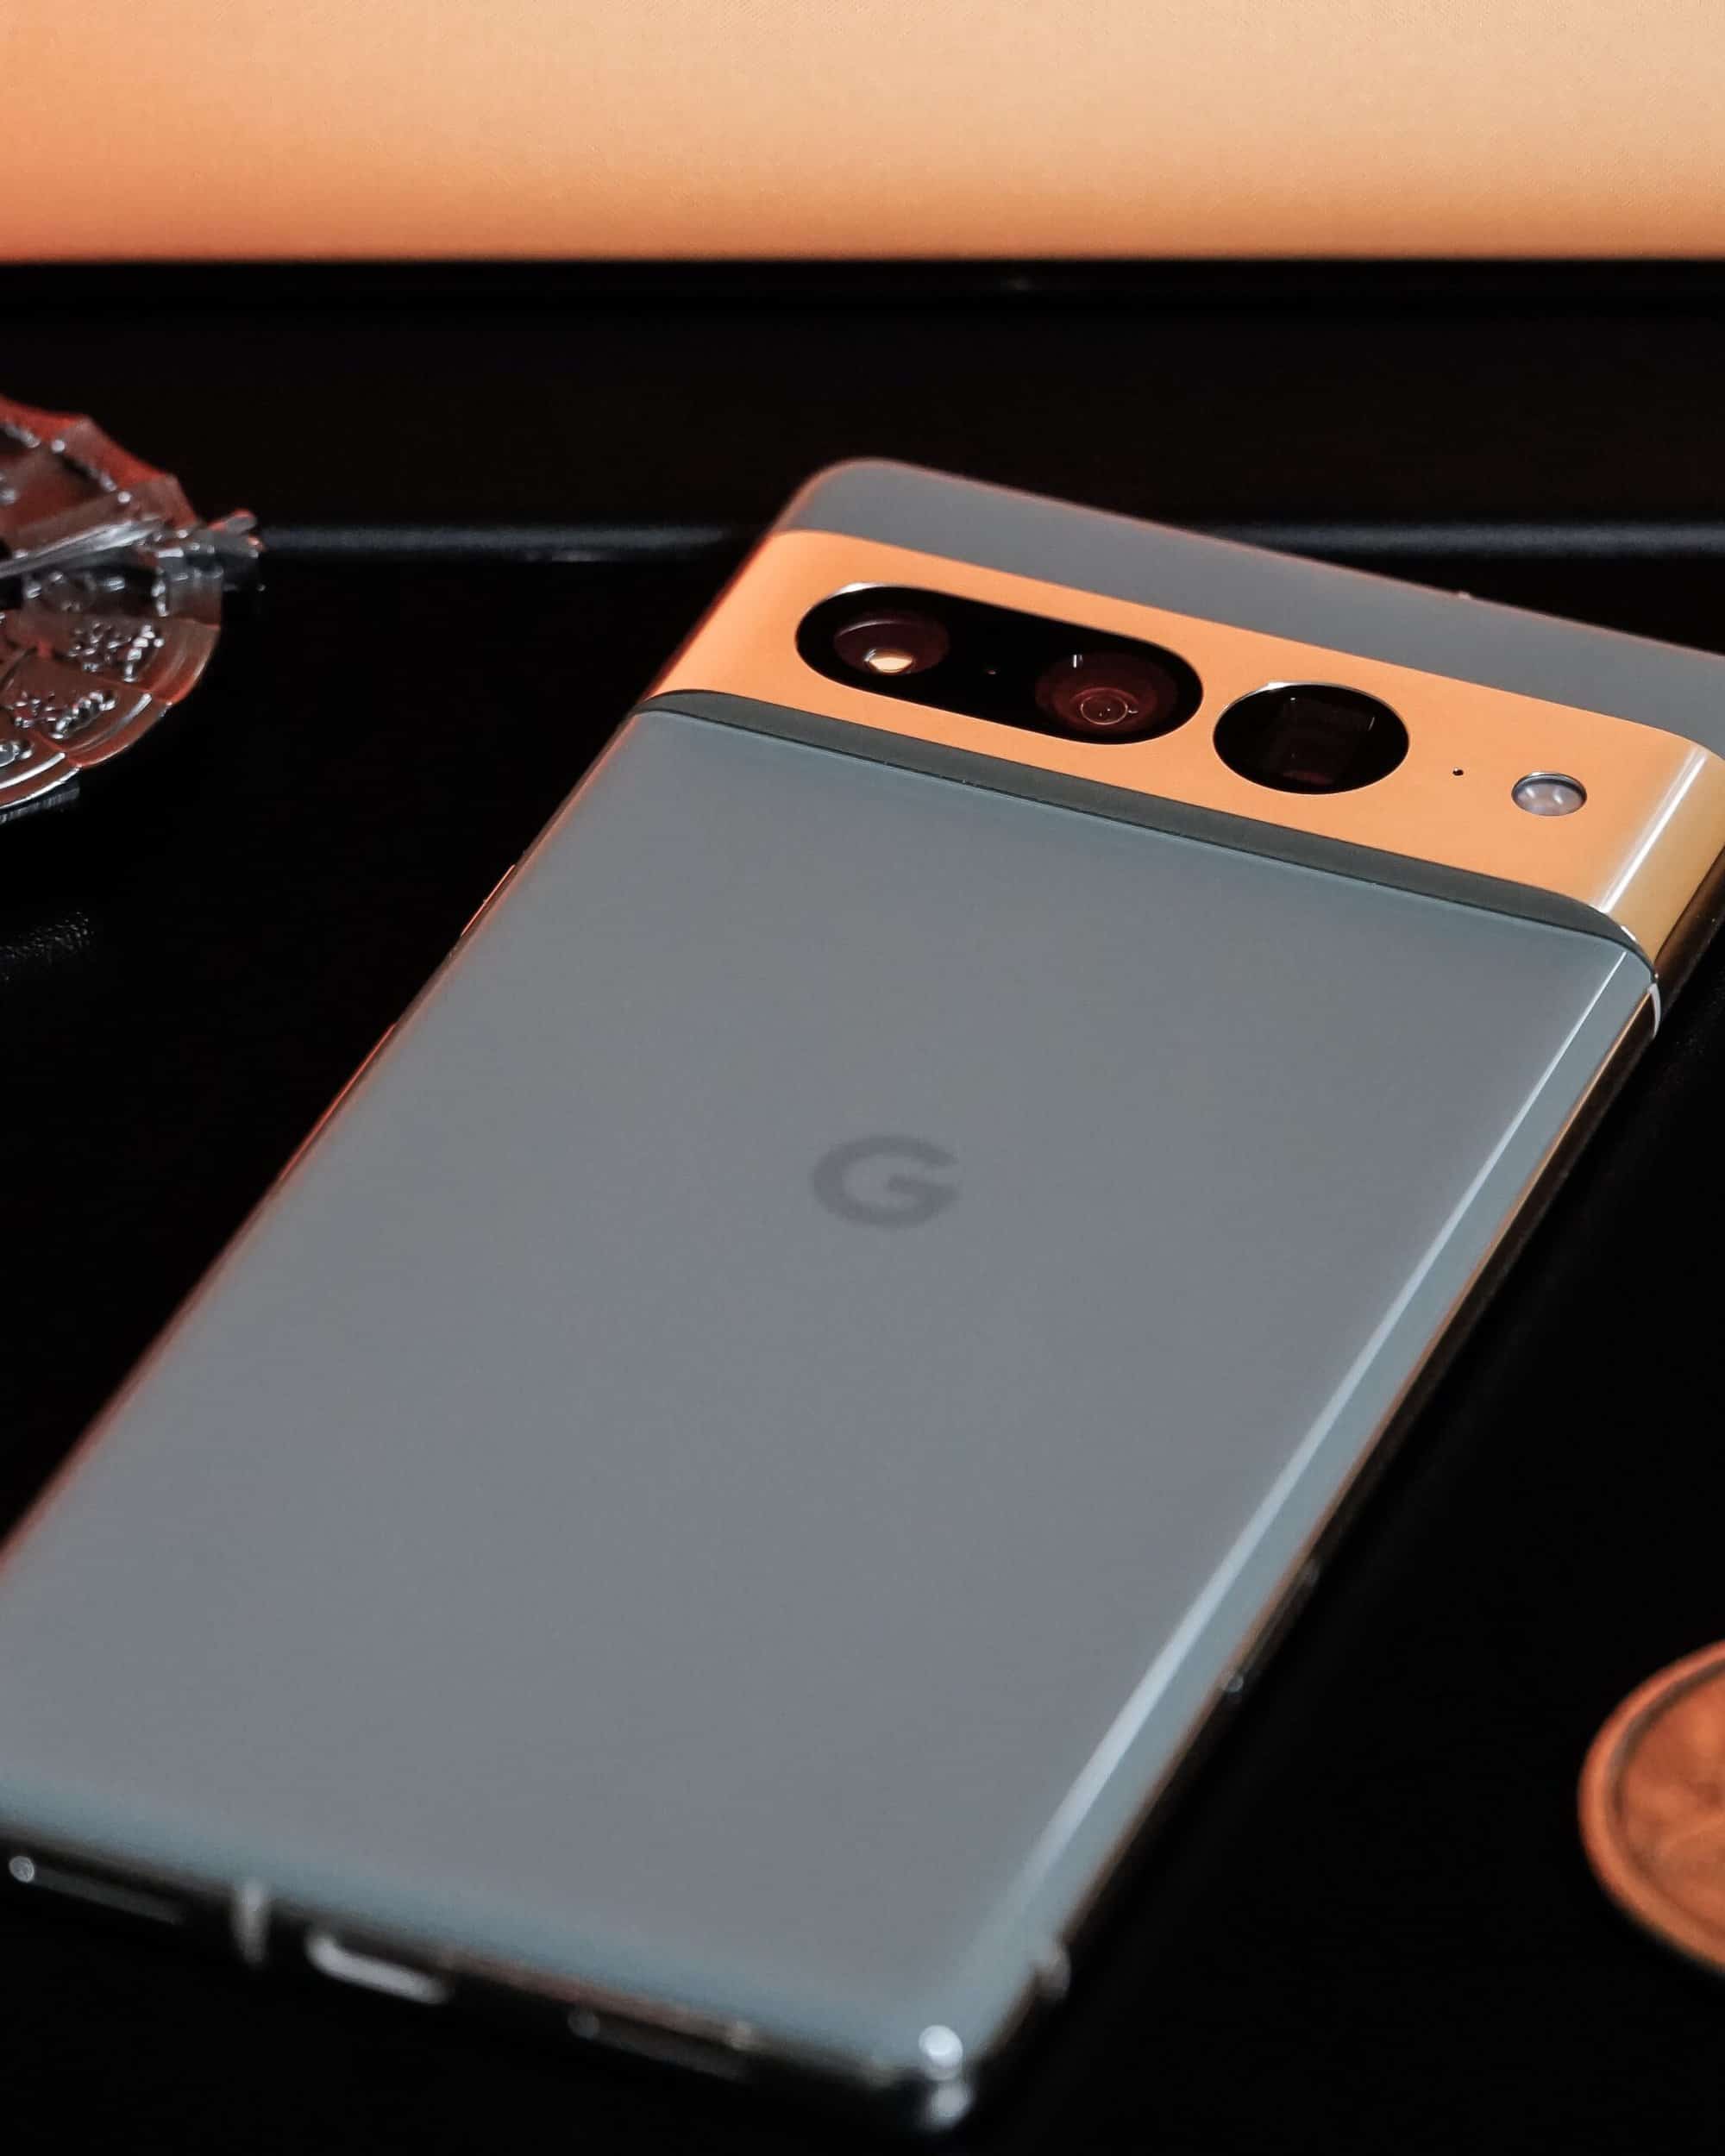 Google Pixel 7 for Business: The Pros and Cons